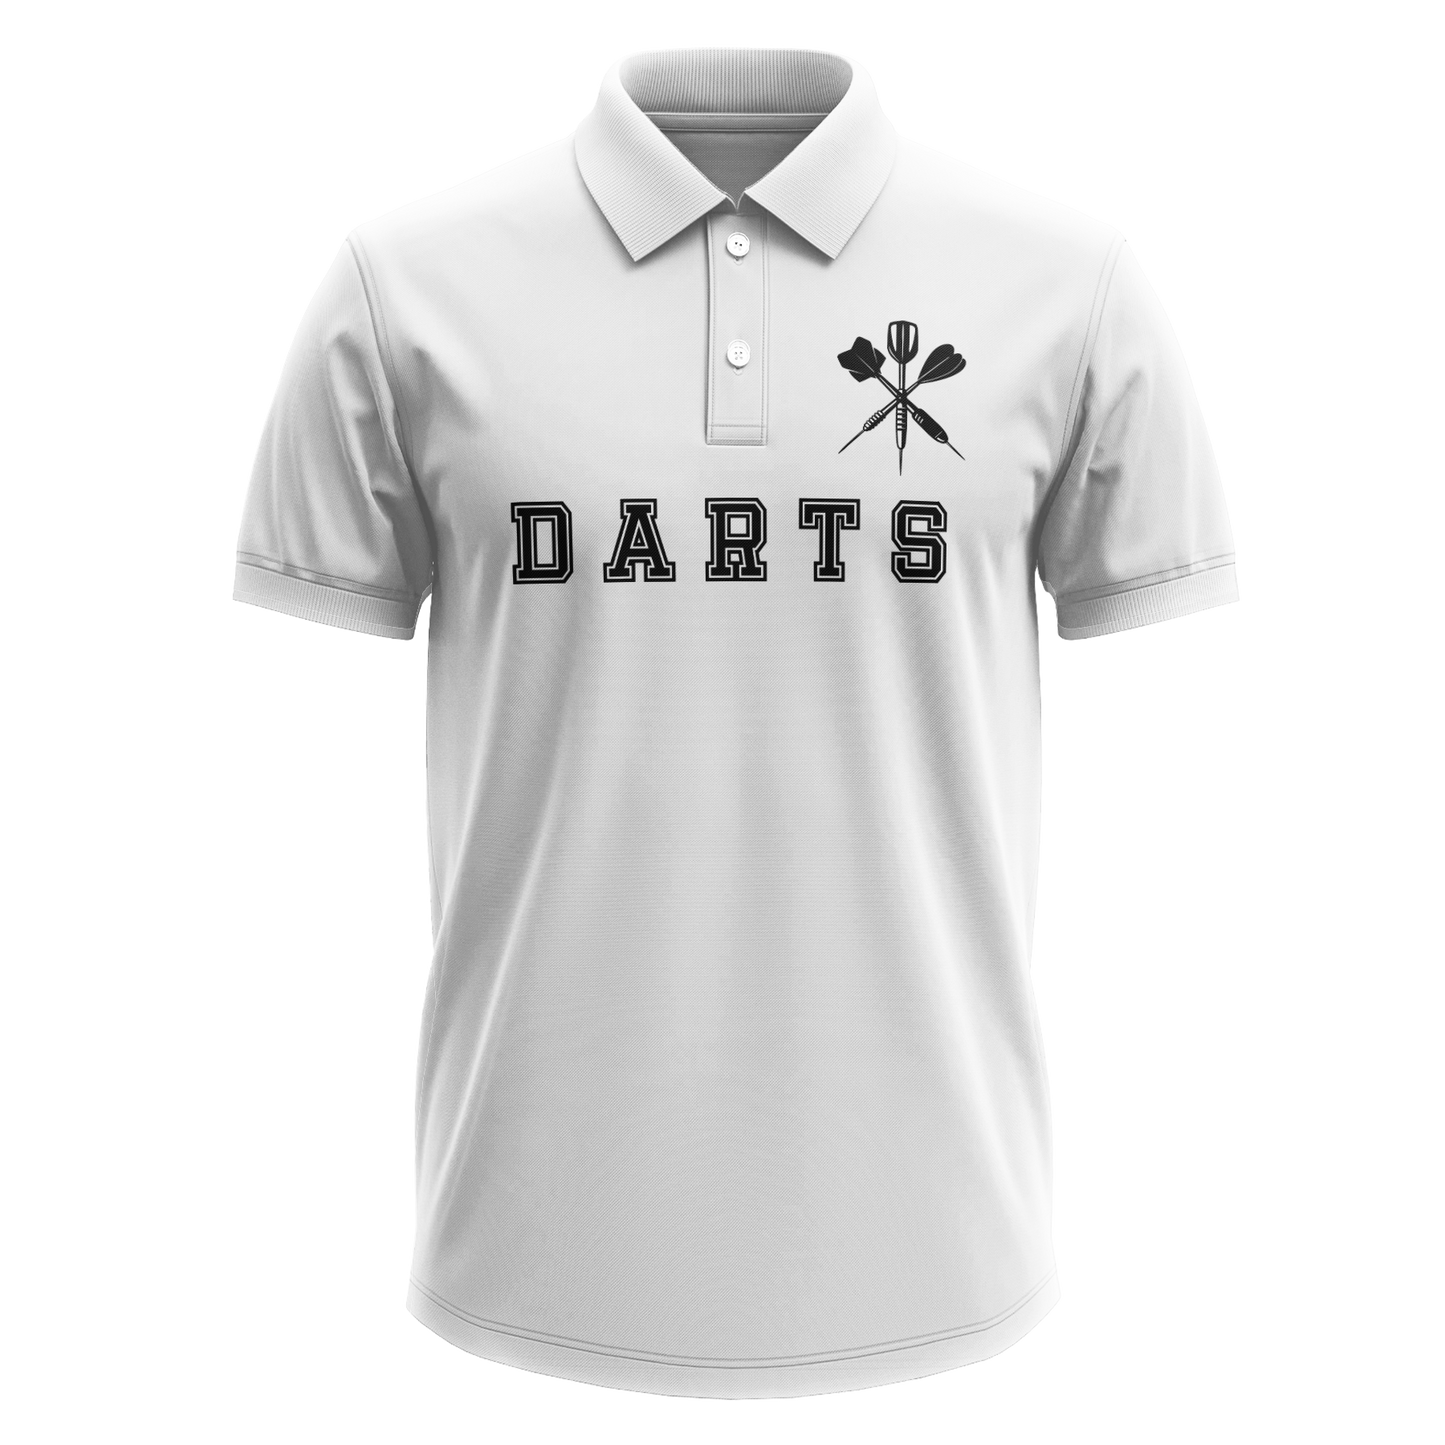 Drifit Polo Shirt: Darts (Front Only)